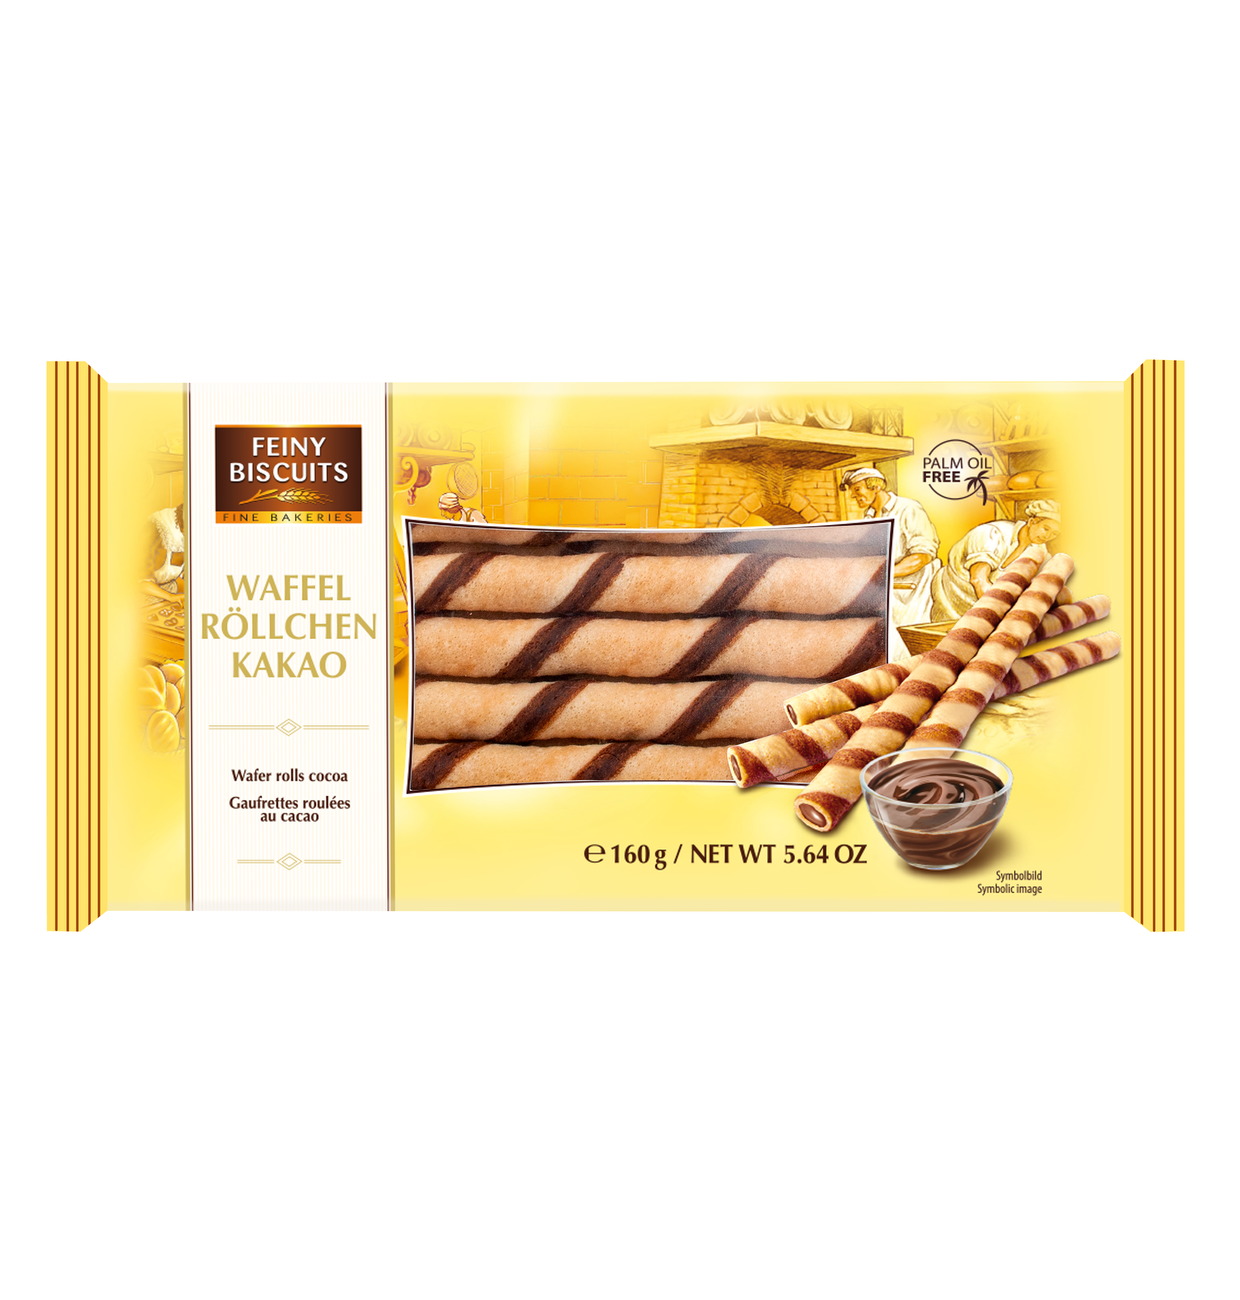 Wafer rolls cocoa Fine Biscuits (22 x 160g)